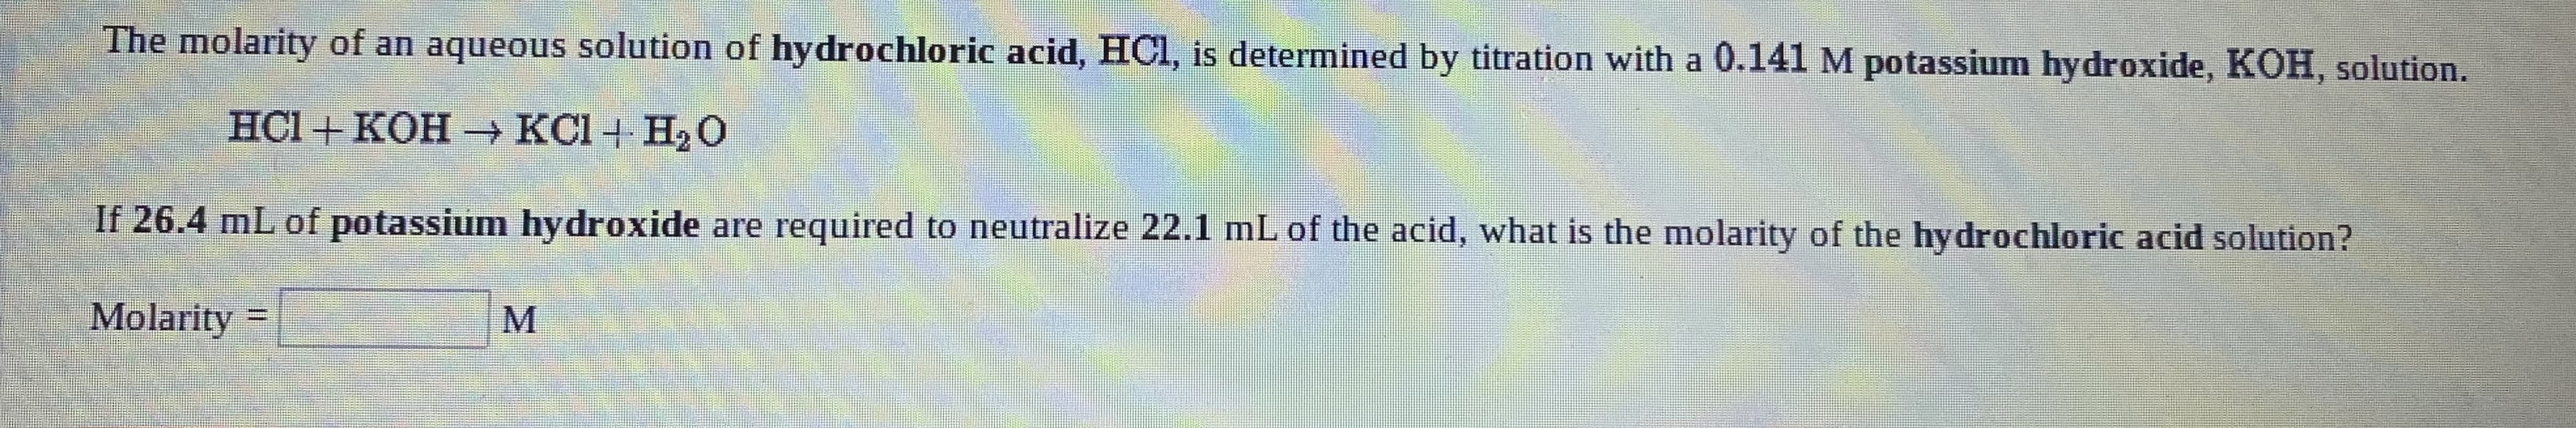 The molarity of an aqueous solution of hydrochloric acid, HCl, is determined by titration with a 0.141 M potassium hydroxide, KOH, solution.
HC1 + КОН — КСІ+ Н,О
If 26.4 mL of potassium hydroxide are required to neutralize 22.1 mL of the acid, what is the molarity of the hydrochloric acid solution?
Molarity
